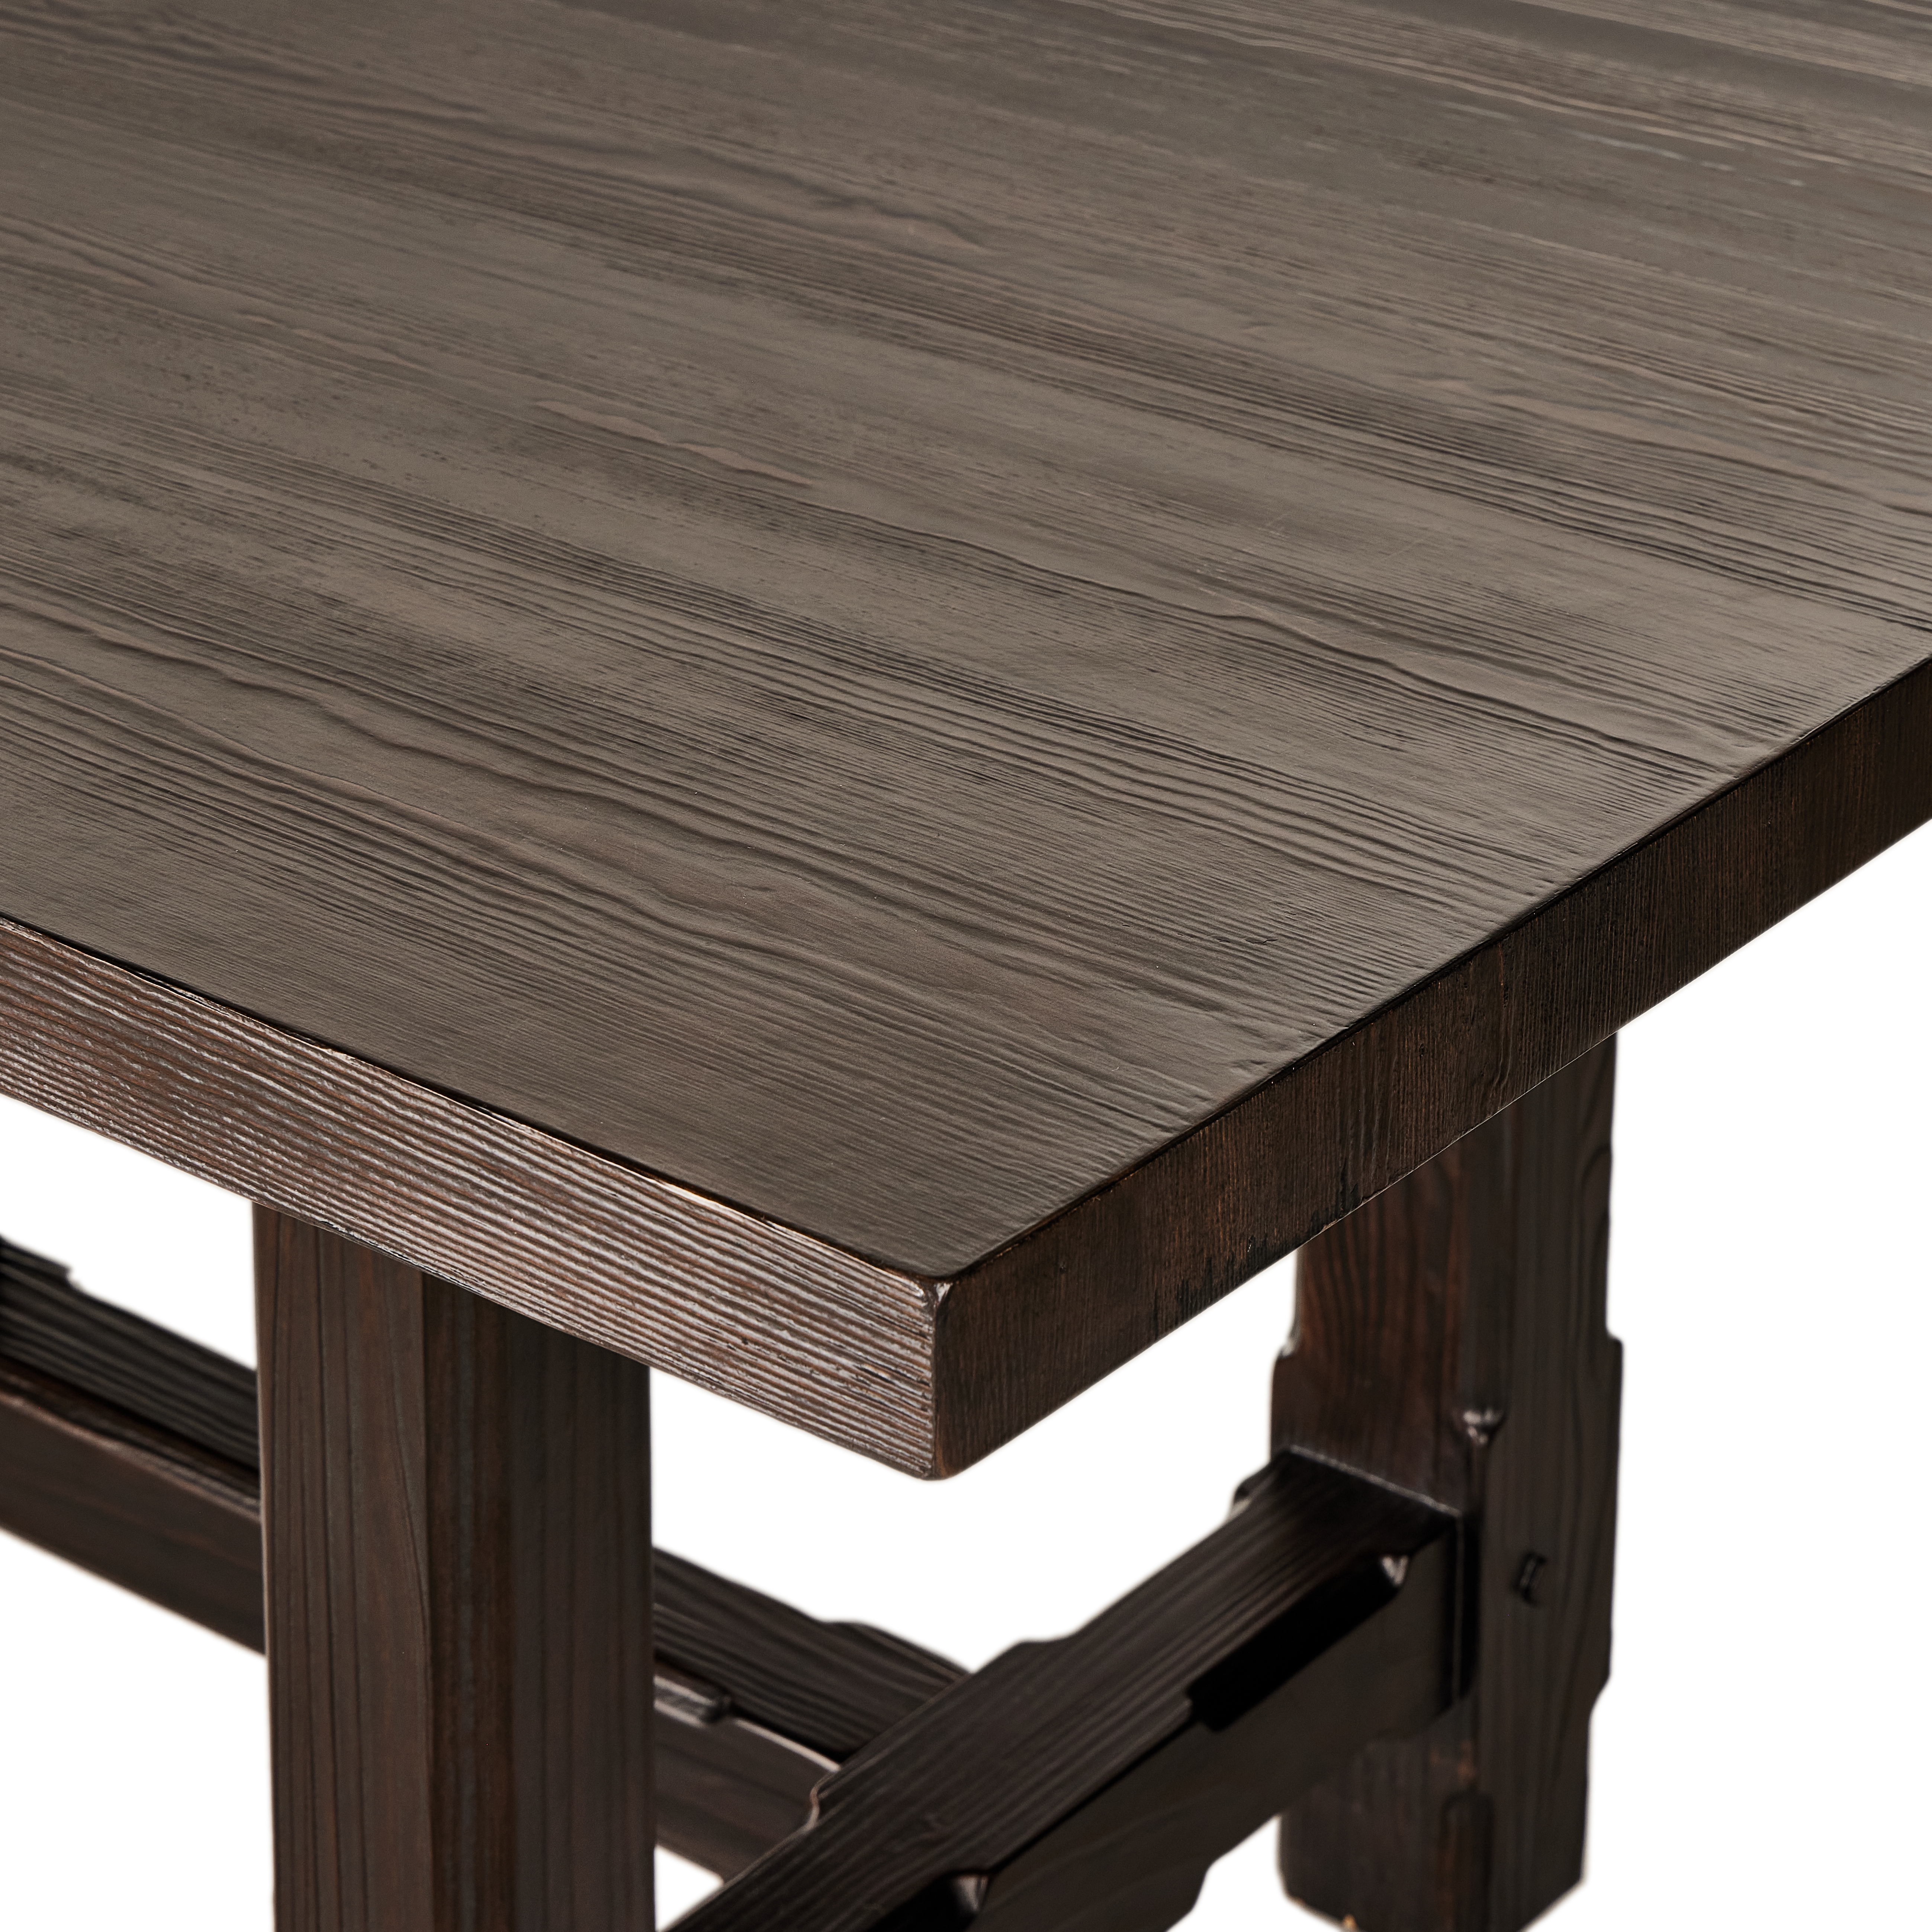 The Arch Dining Table-Medium Brown Fir - Image 7